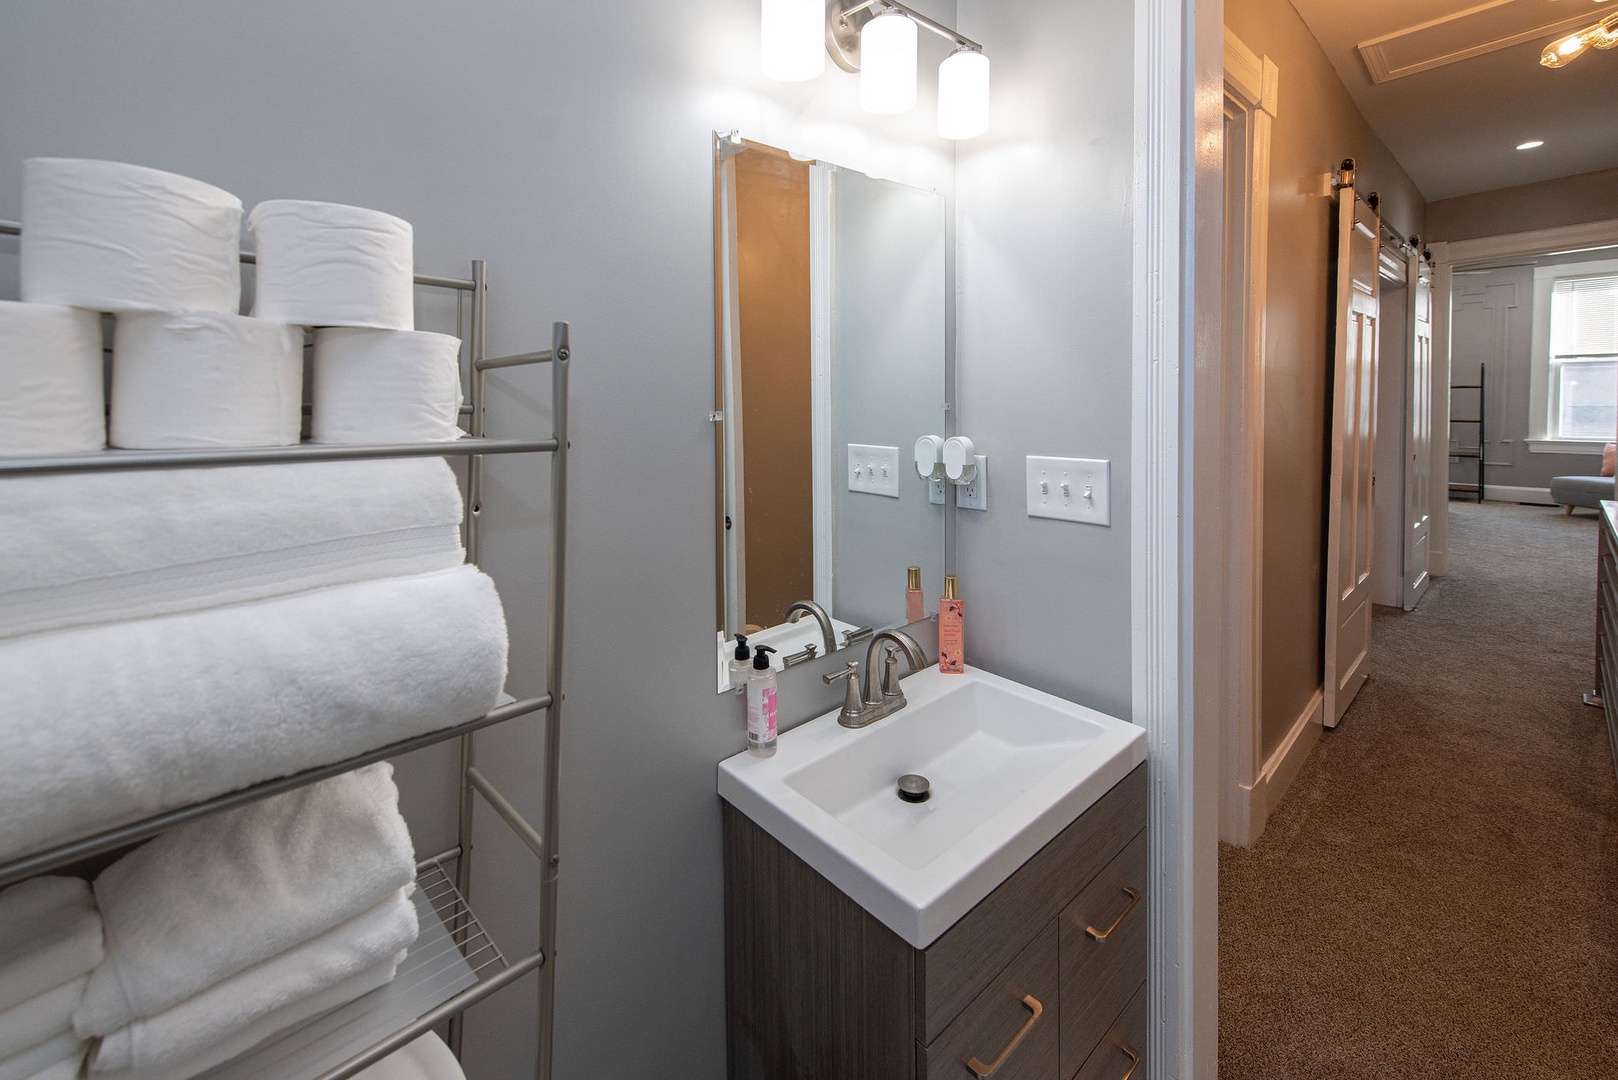 Suite 2 – The 2nd floor full bath includes a single vanity & glass shower